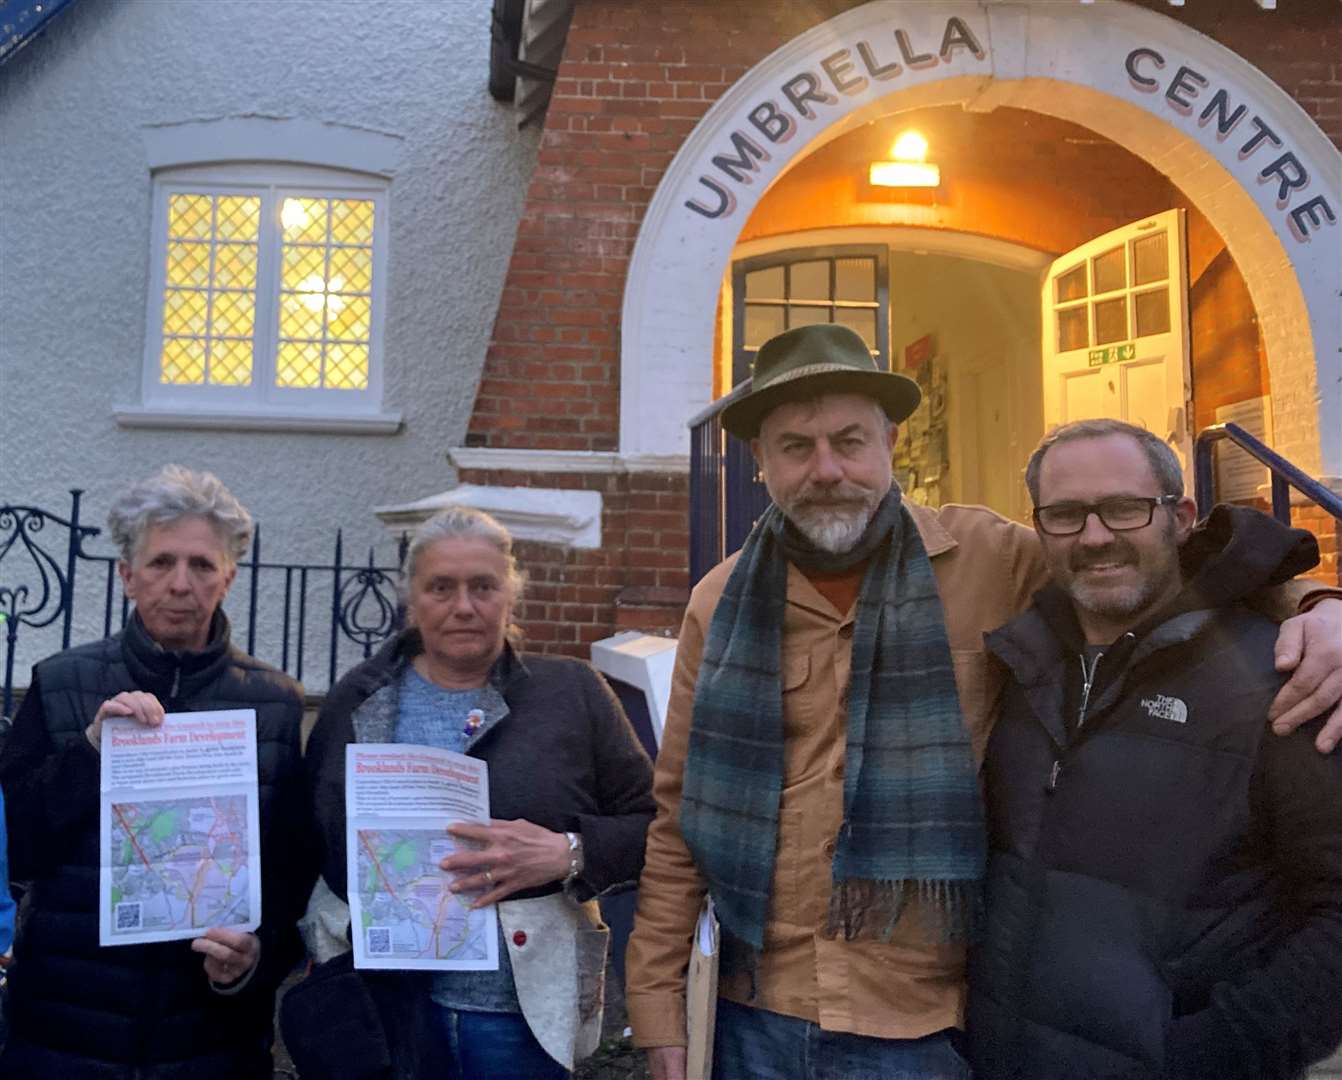 Objectors outside the Umbrella Centre in Whitstable after the meeting. Left to right: Moi Poulter, Emily Firmin, Justin Mitchell and Darrell Back